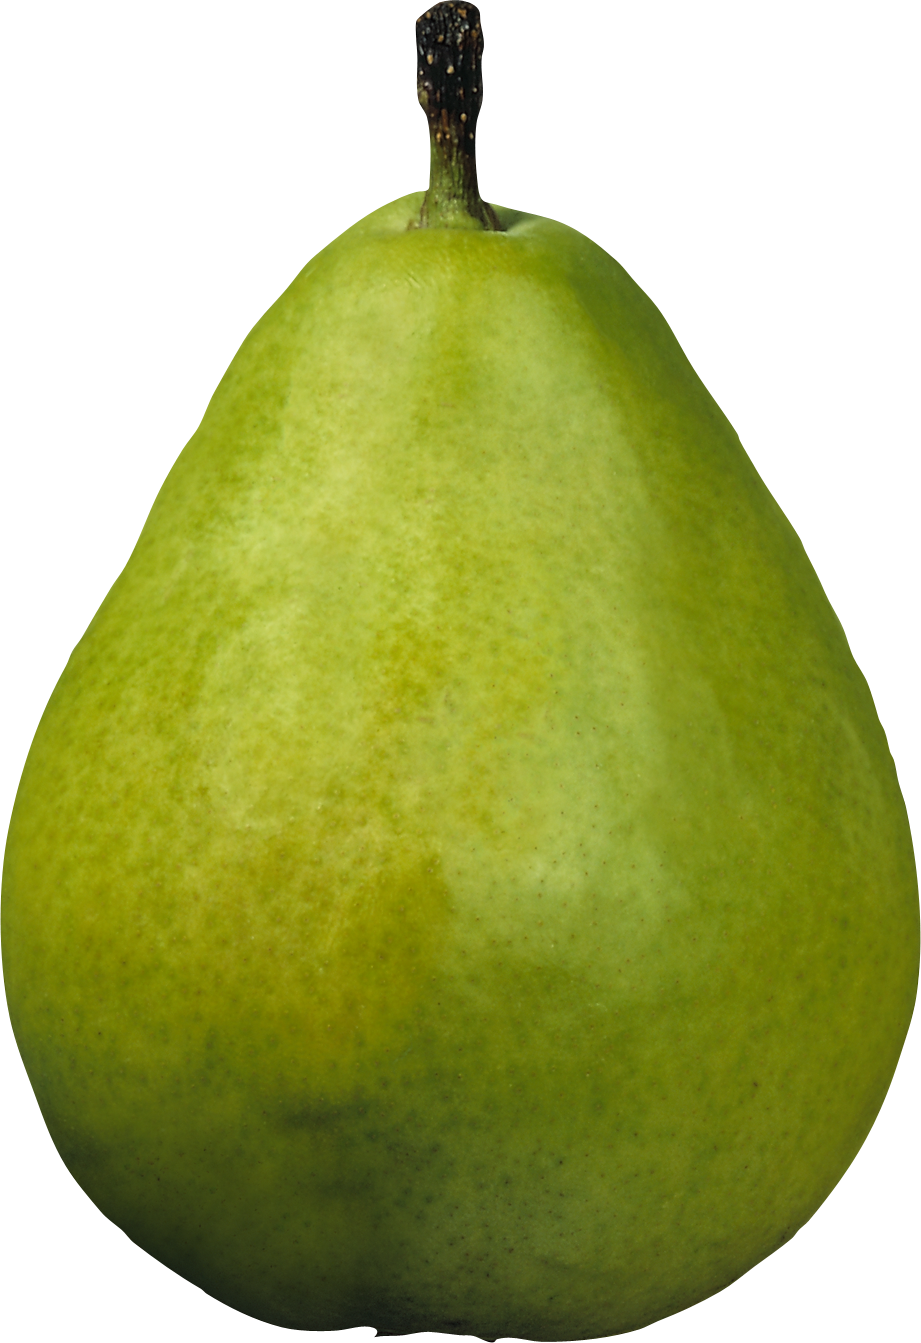 Green Organic Pears Download HQ PNG Image